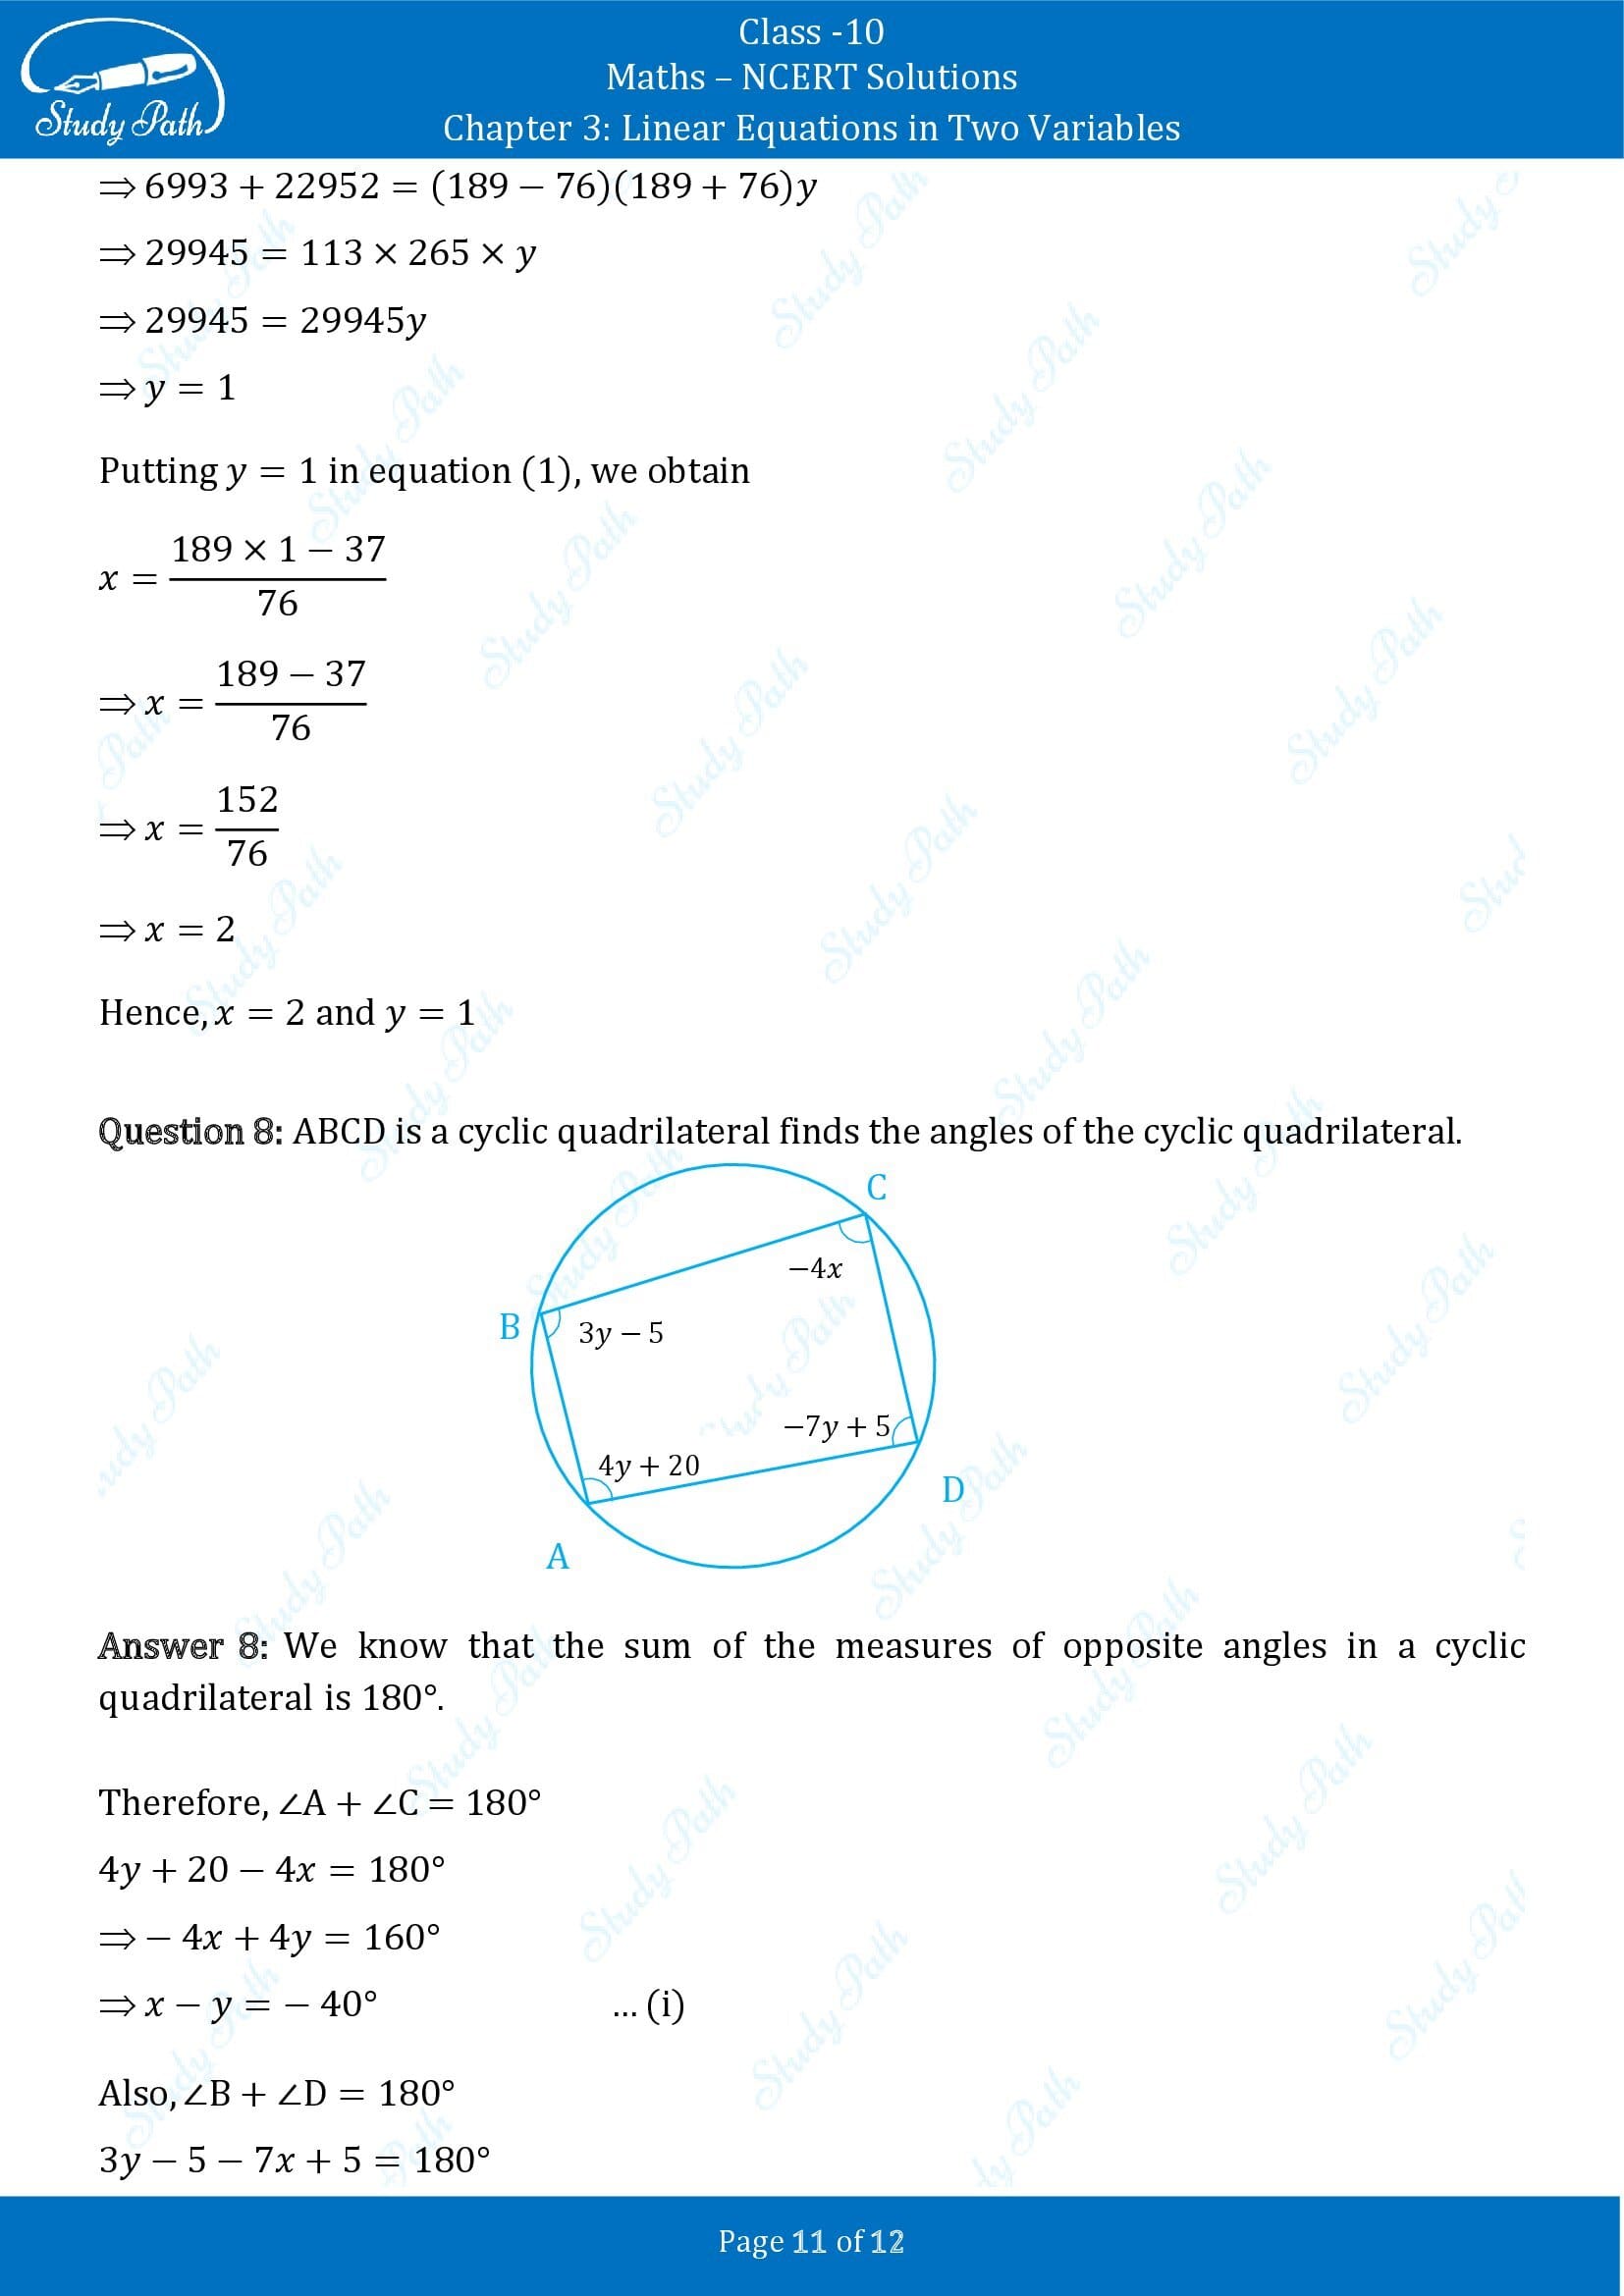 NCERT Solutions for Class 10 Maths Chapter 3 Linear Equations in Two Variables Exercise 3.7 00011